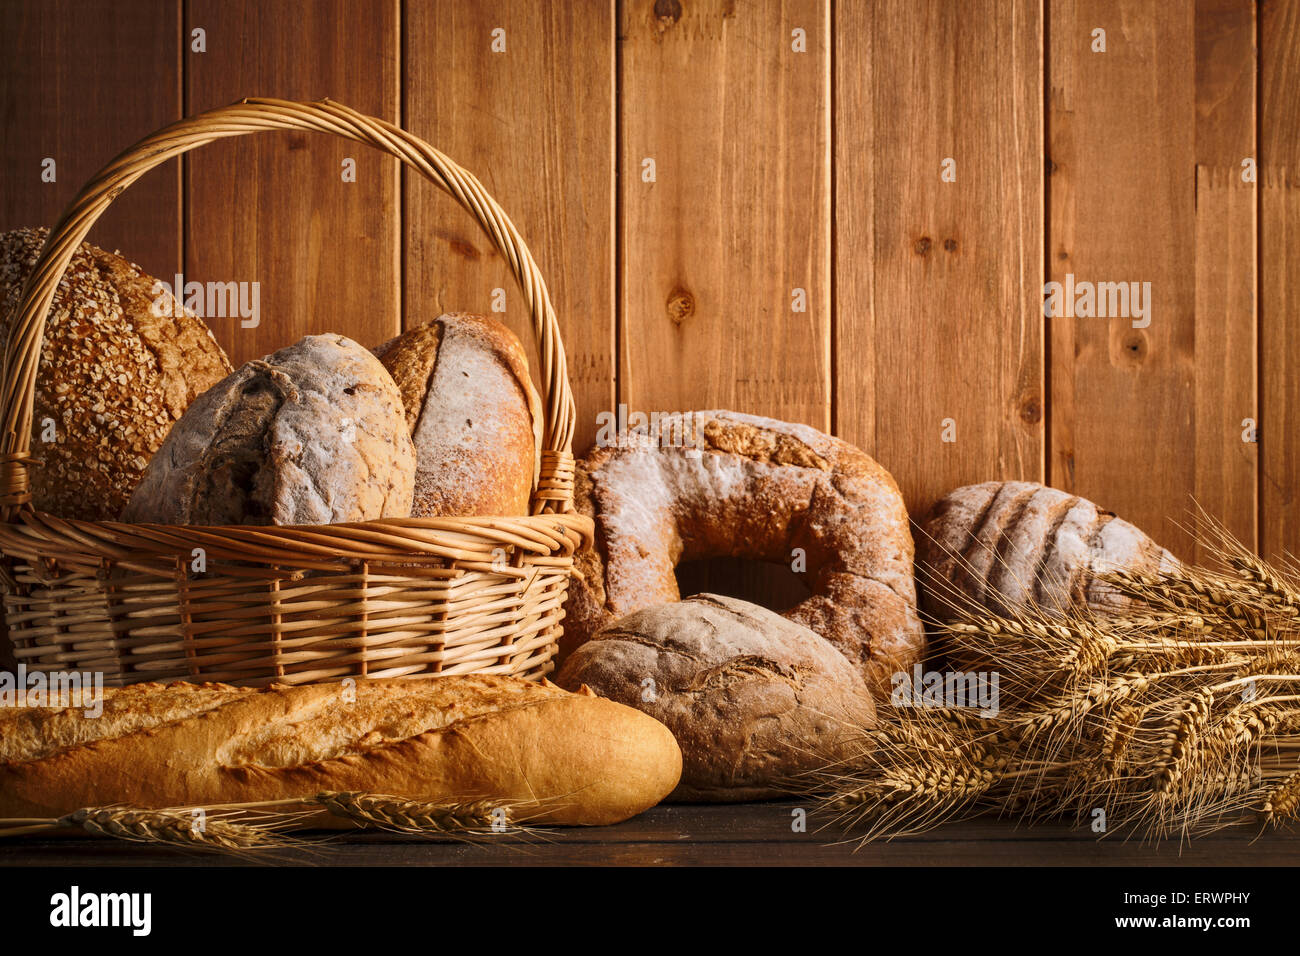 fresh bread and wheat on the wooden Stock Photo